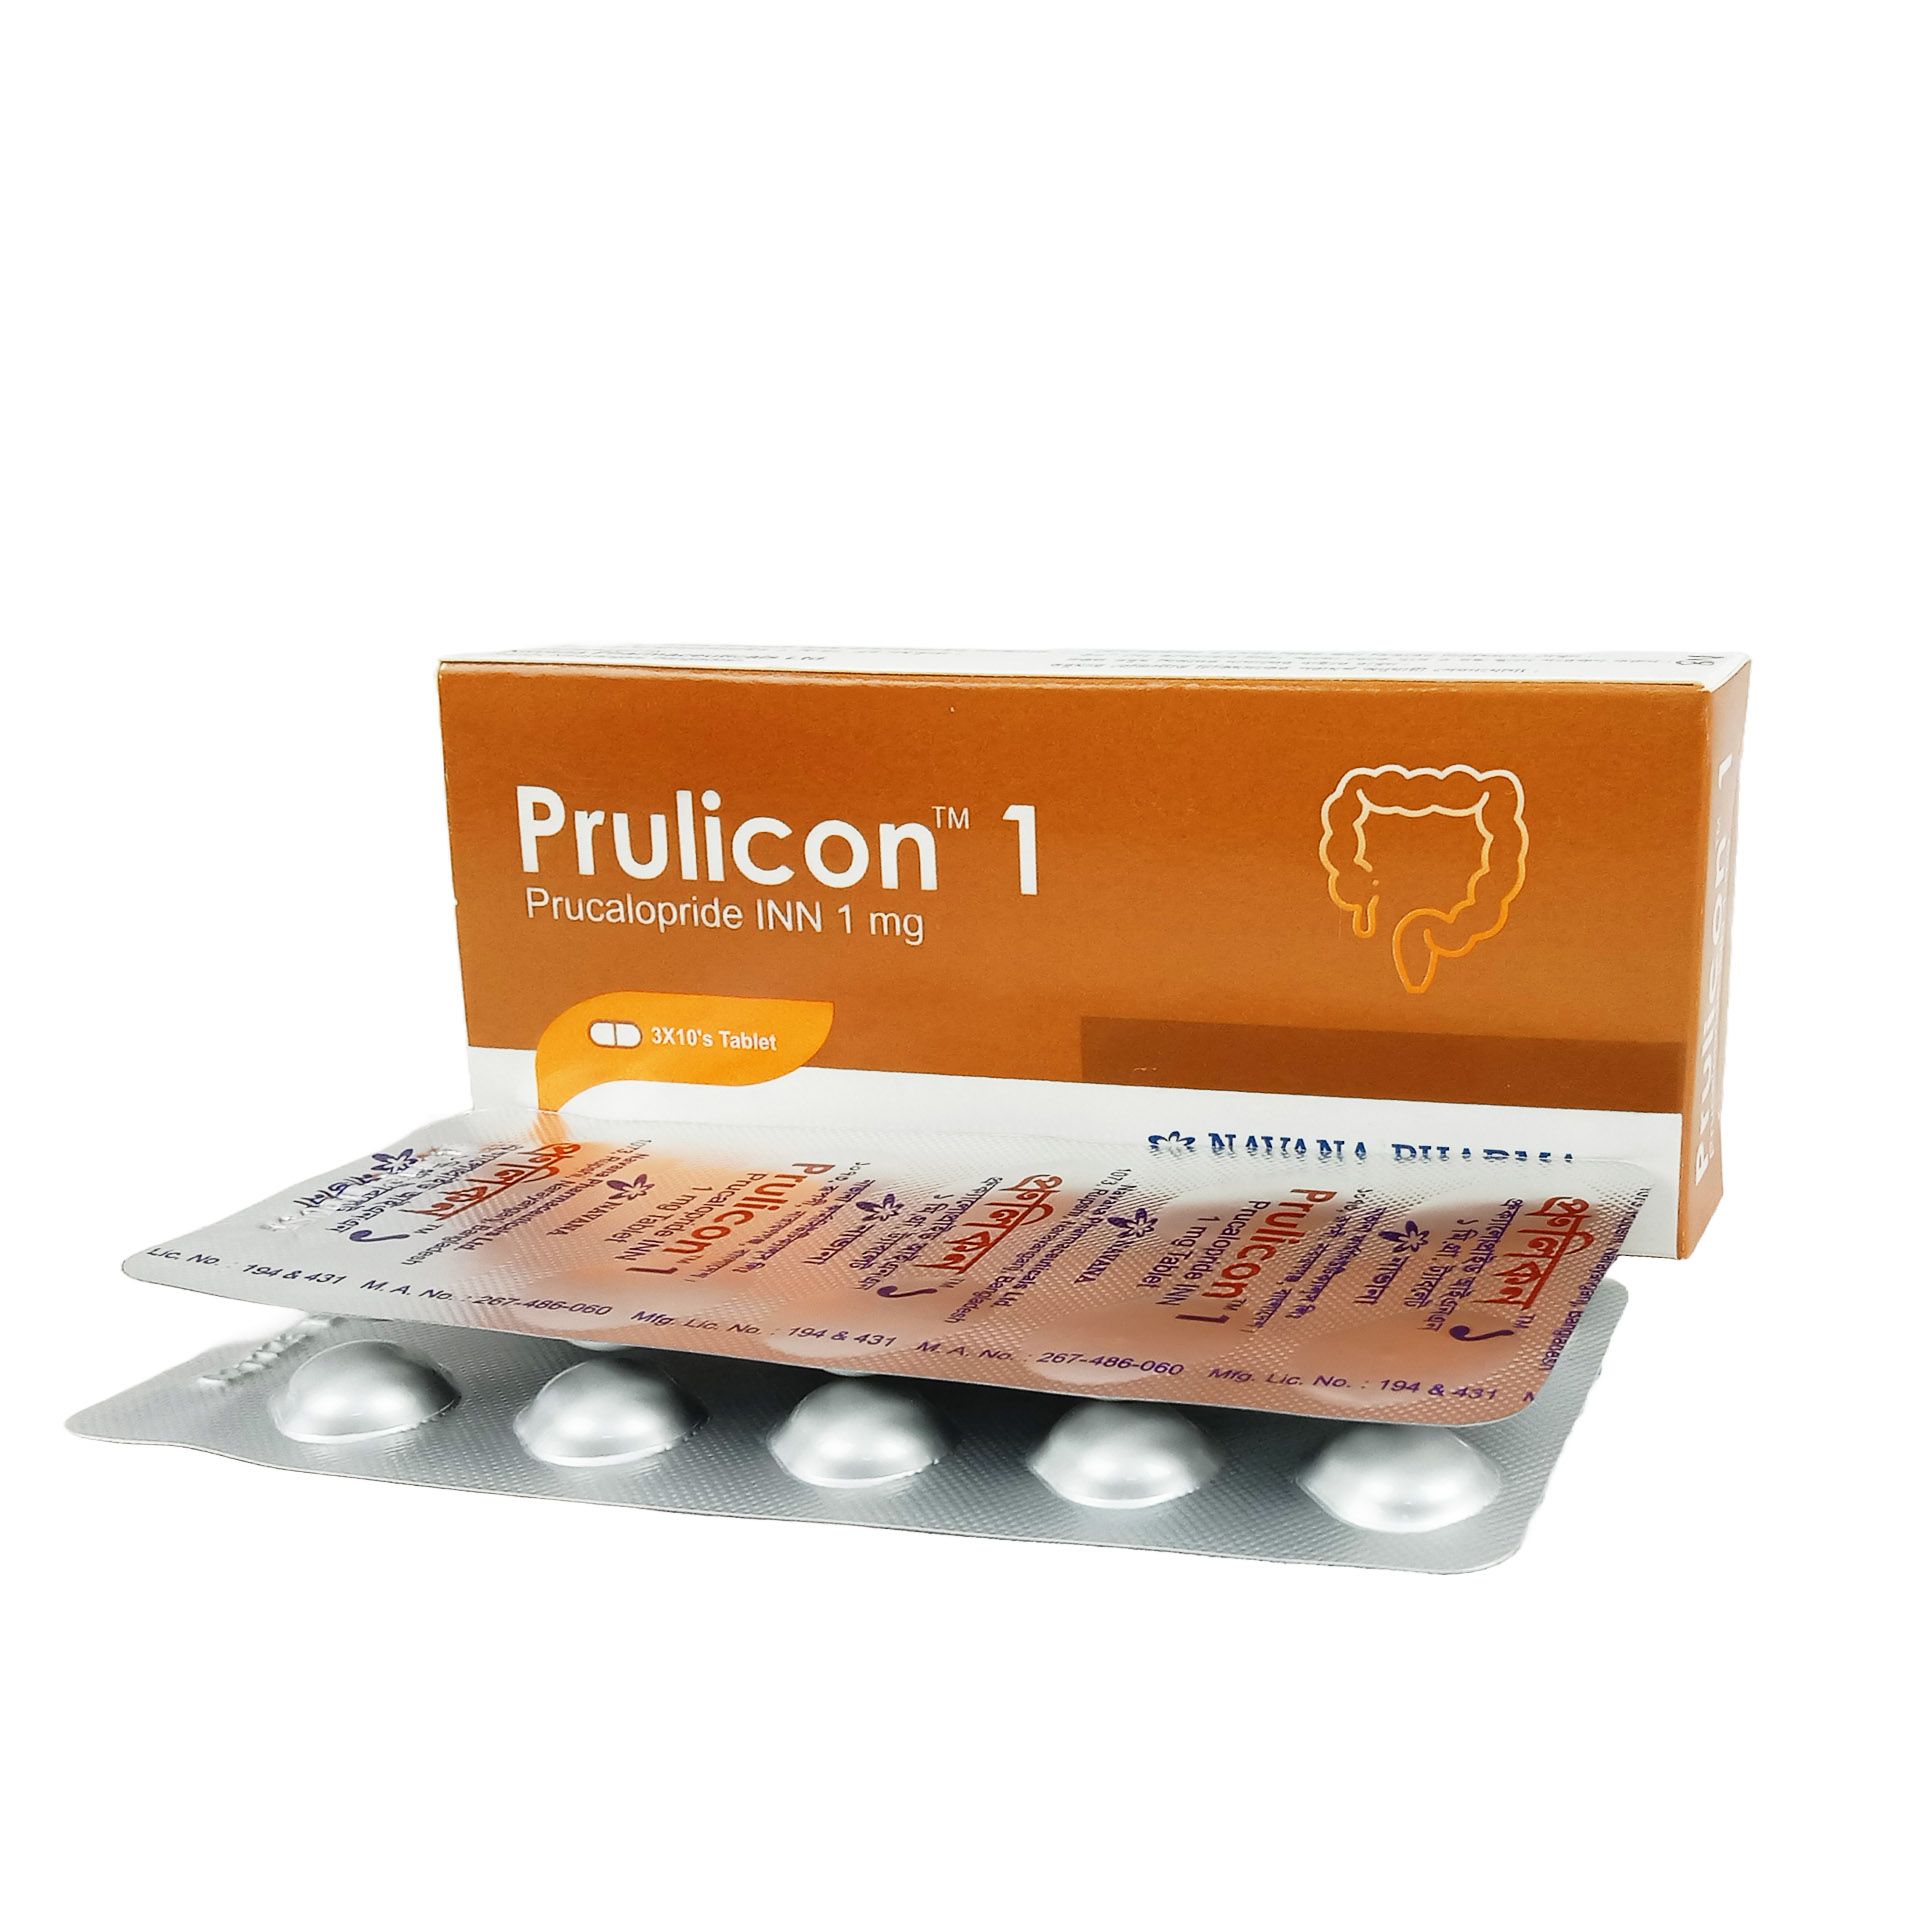 Prulicon 1mg Tablet